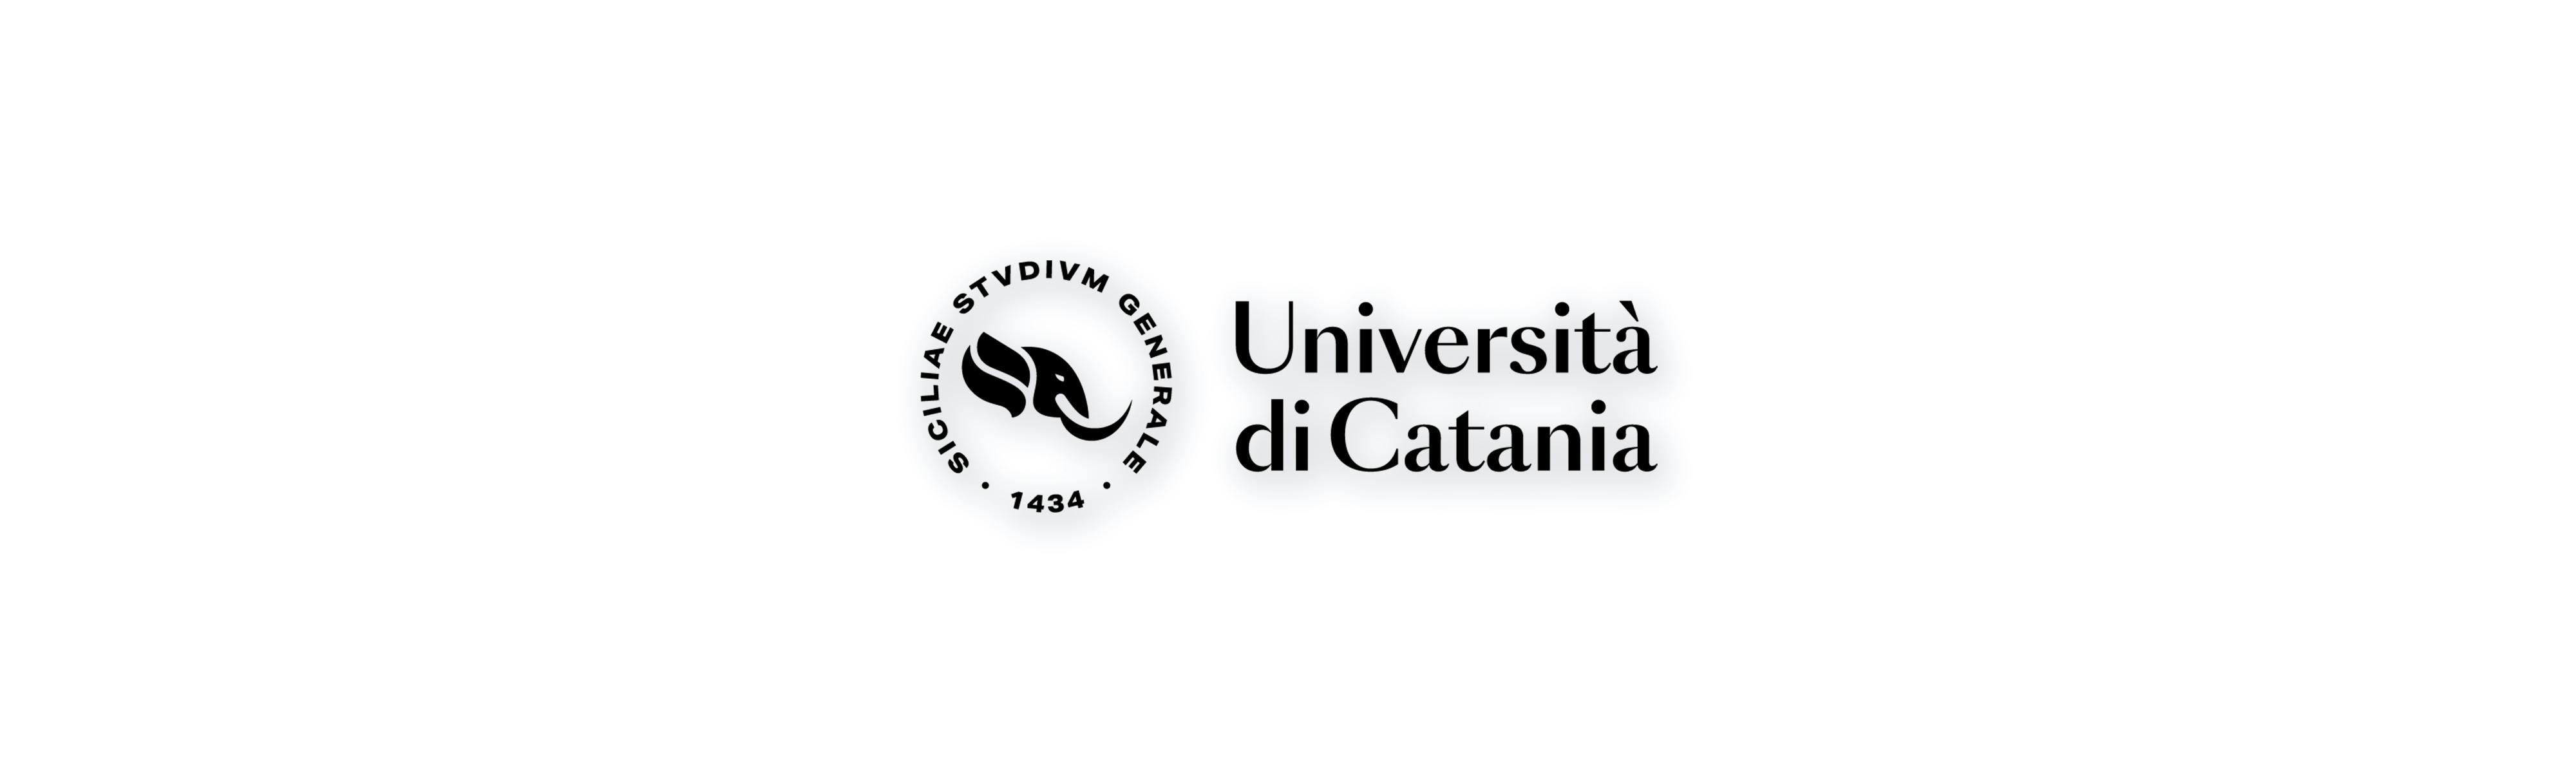 The image shows the logo of the University of Catania. The logo consists of a circle formed by the words "SICILIAE STVDIVM GENERALE - 1434" with a graphic representation of an elephant (symbol of the university) inside. The logo is black on a white background with light shading below the logo.